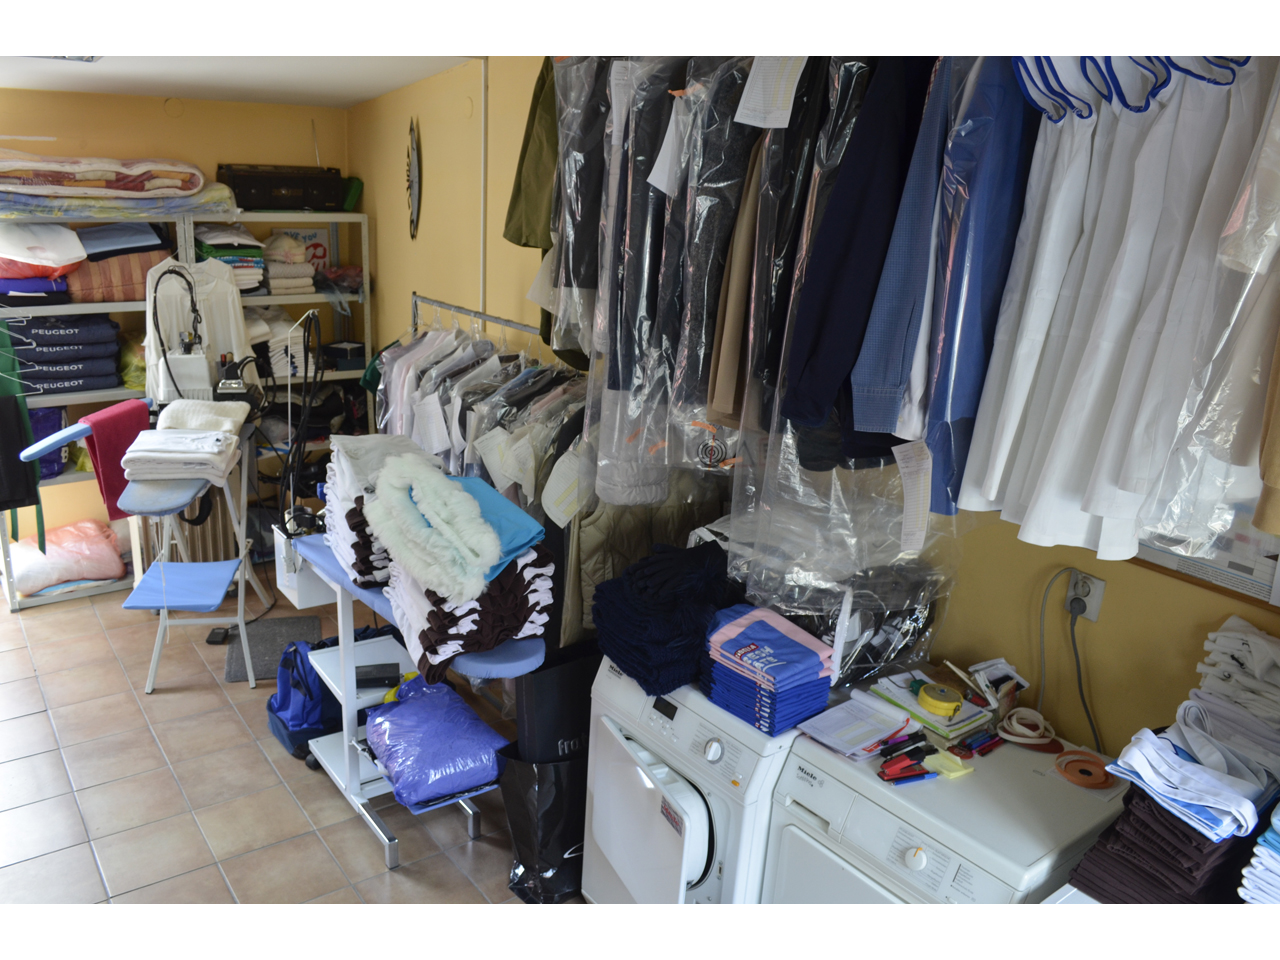 GLANC WASH - DRY CLEANING AND LAUNDRY Dry-cleaning Beograd